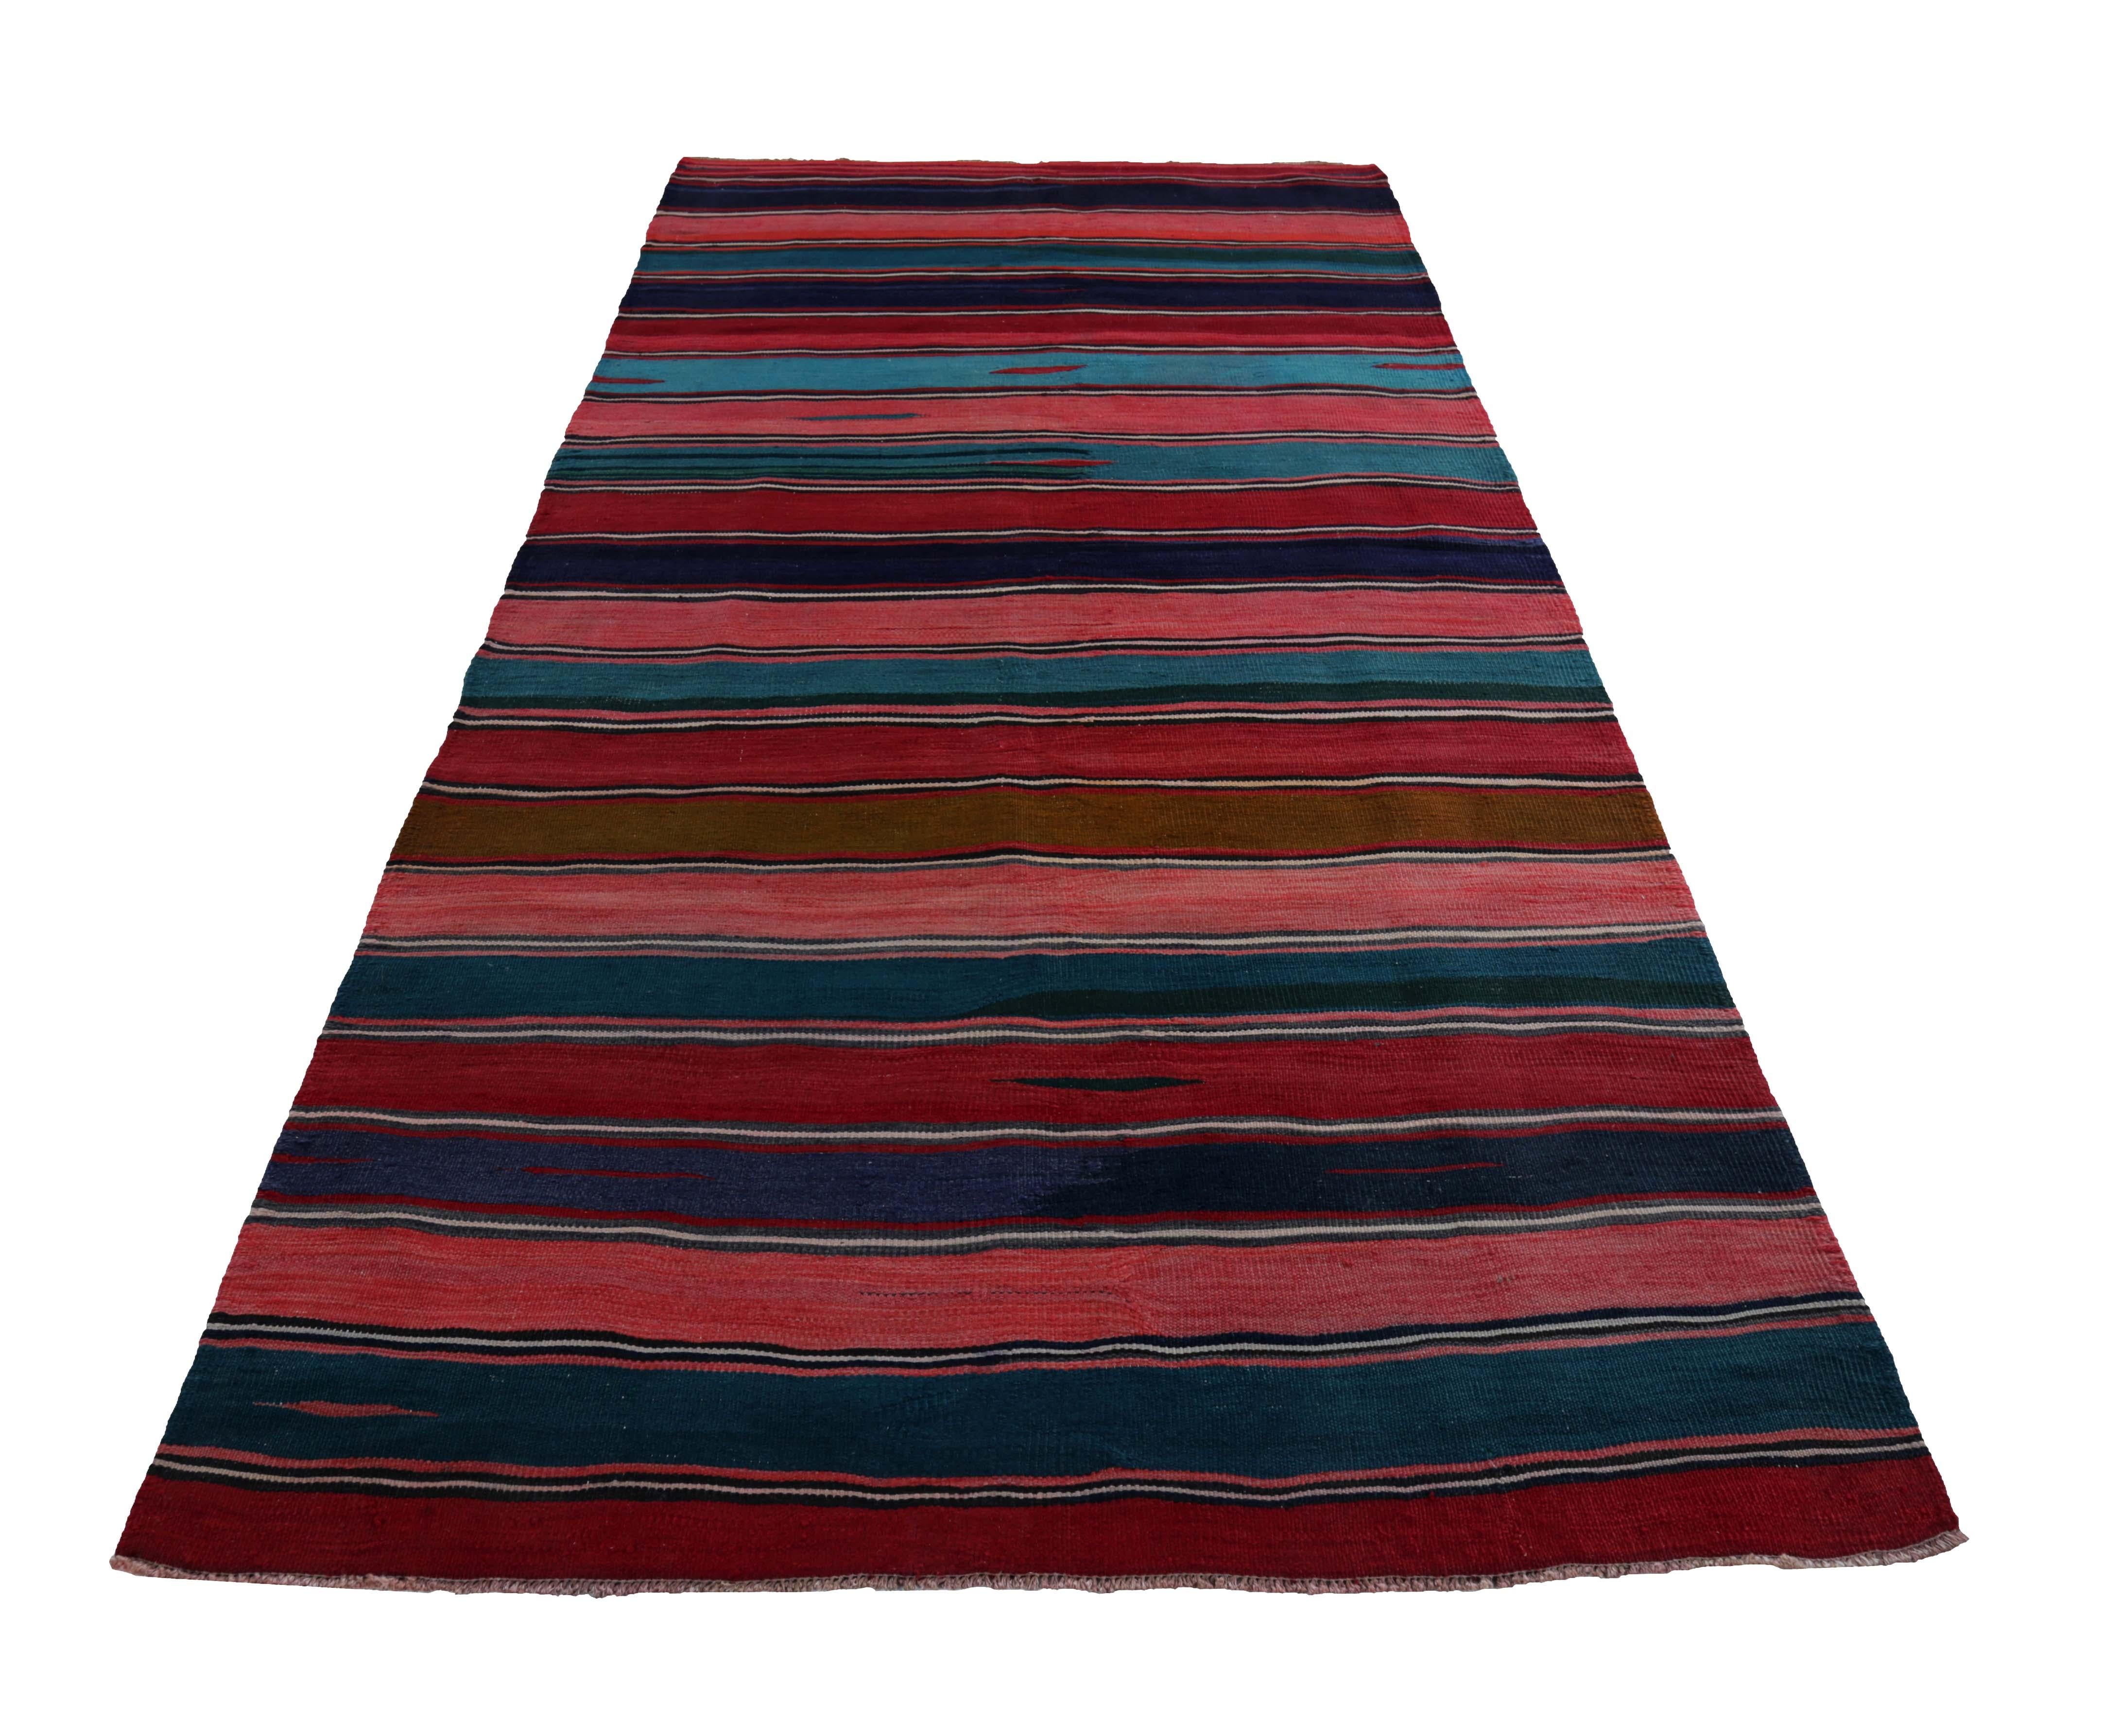 Turkish rug handwoven from the finest sheep’s wool and colored with all-natural vegetable dyes that are safe for humans and pets. It’s a traditional Kilim flat-weave design featuring red, pink and blue stripes. It’s a stunning piece to get for